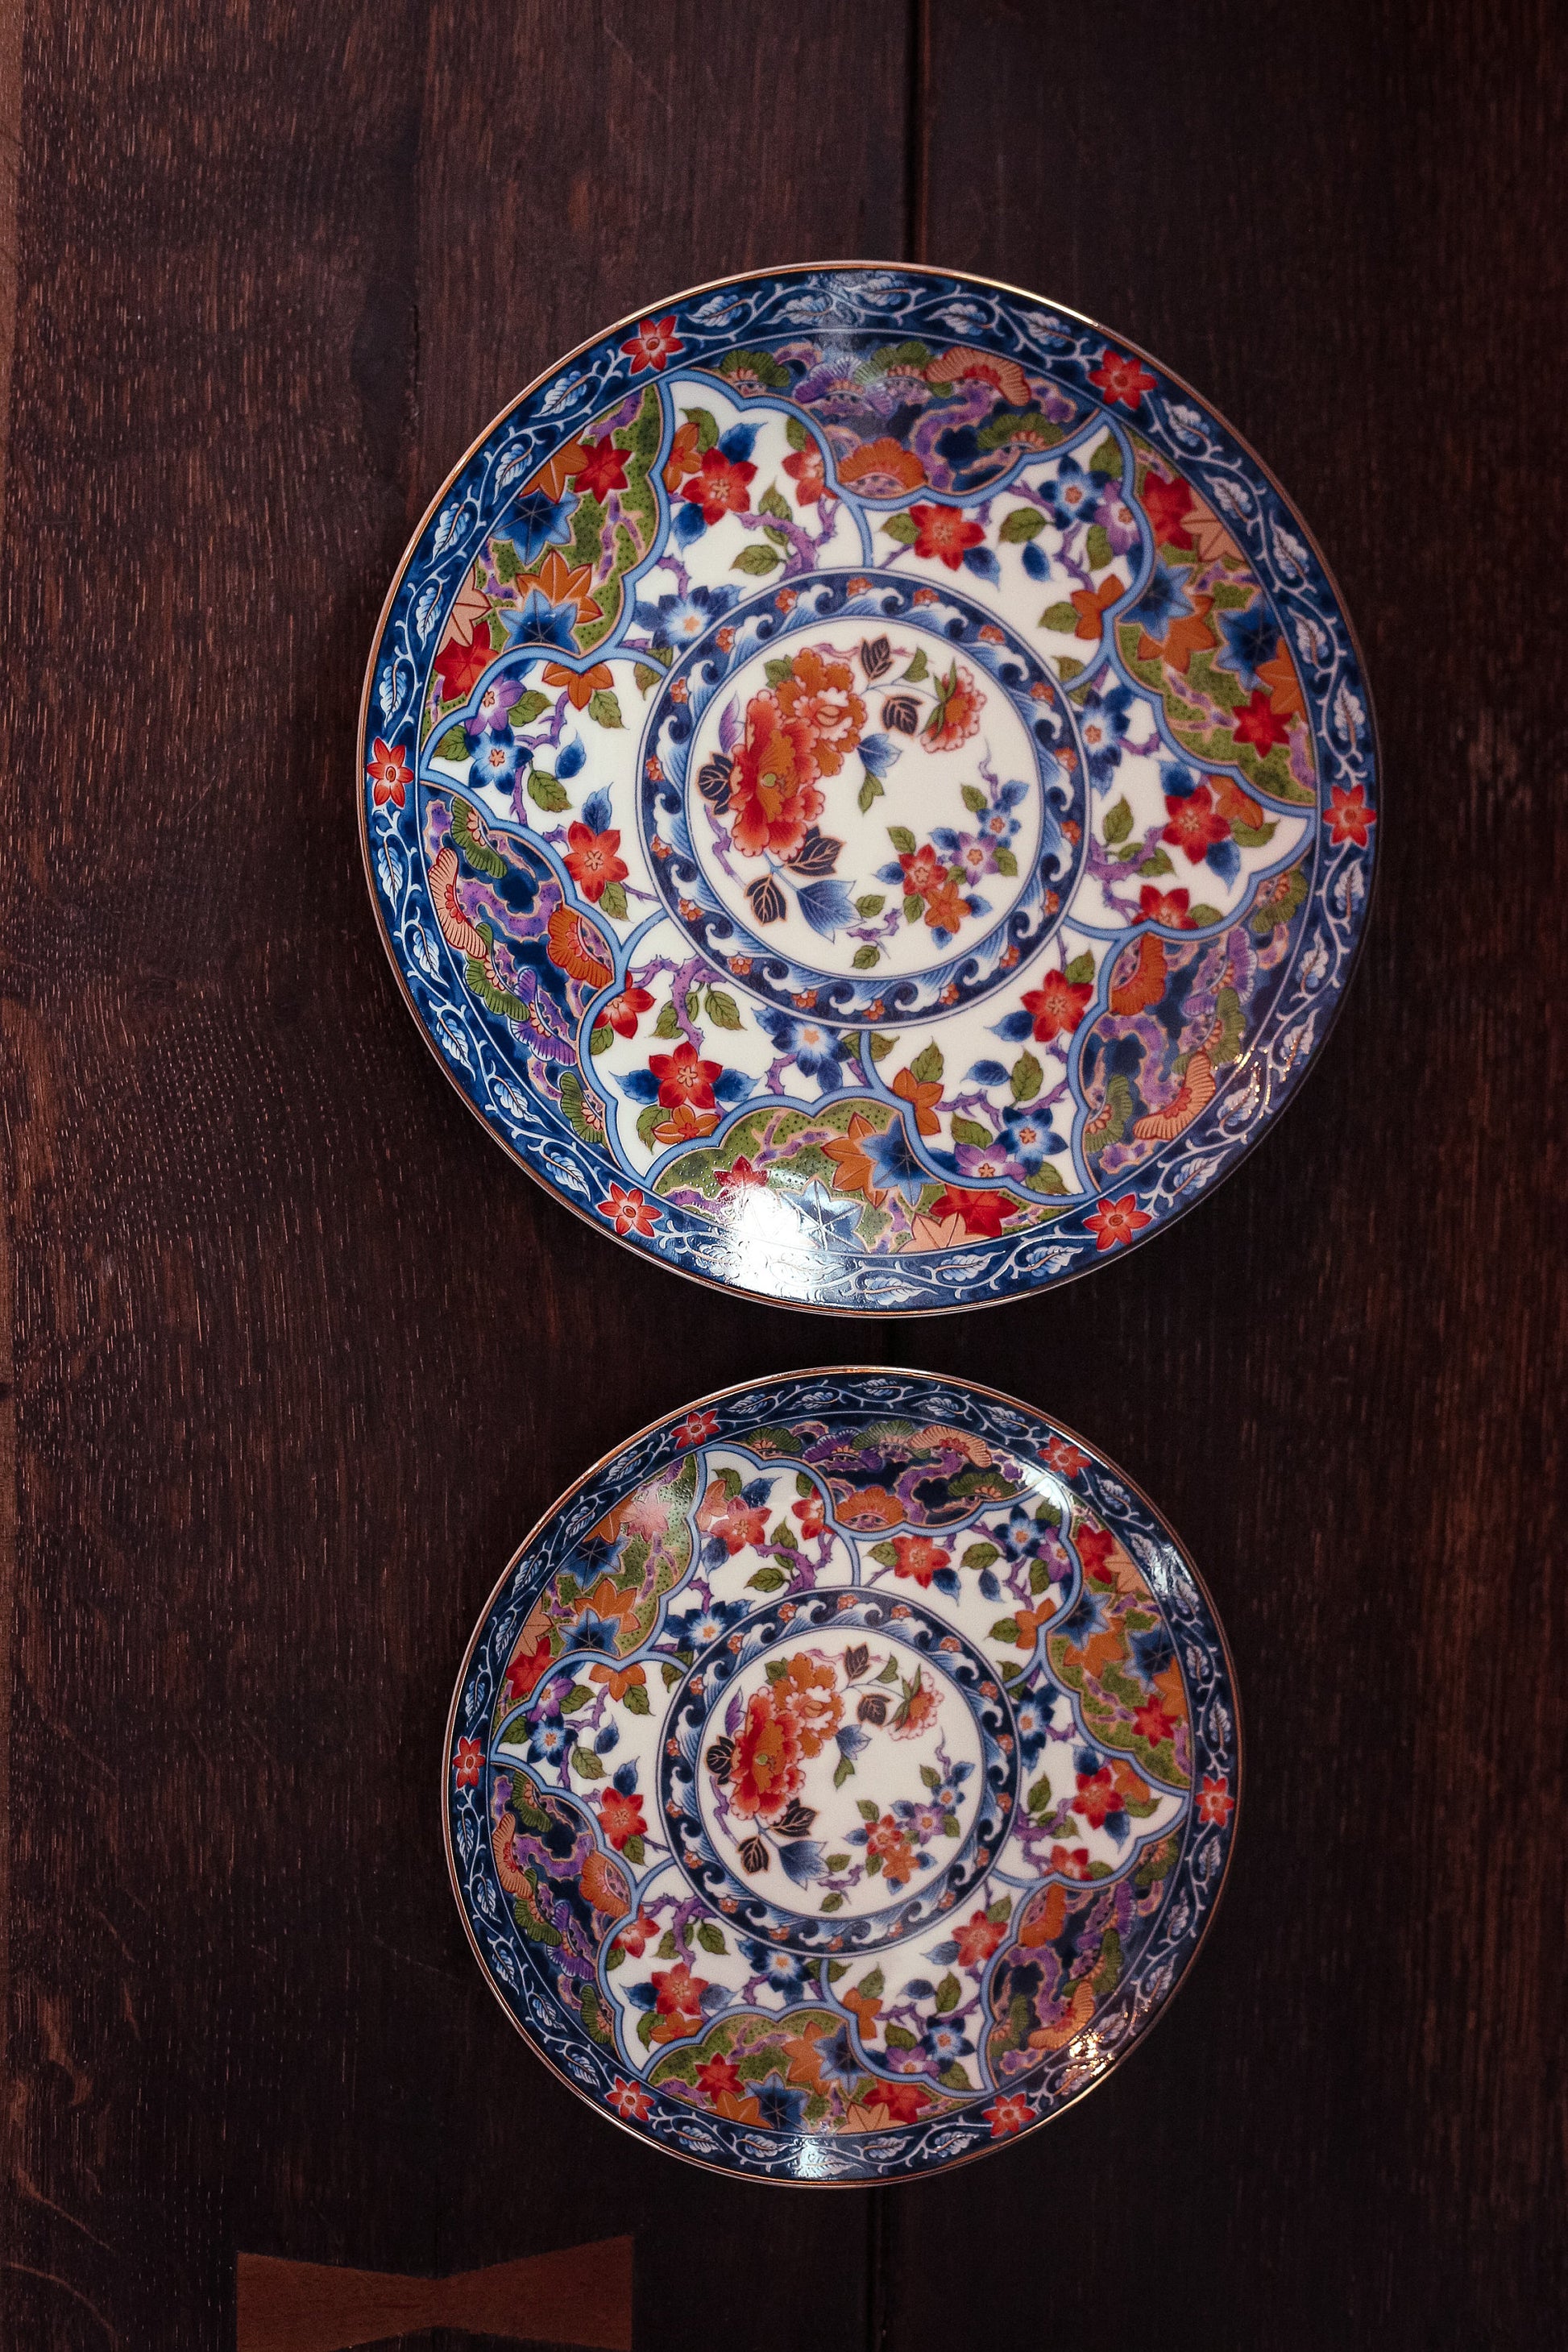 Colorful Round Japanese Porcelain Plates with Gilded Edge - Vintage Eiwa Kinsei Imari Ware Serving Plates with Gold Rim